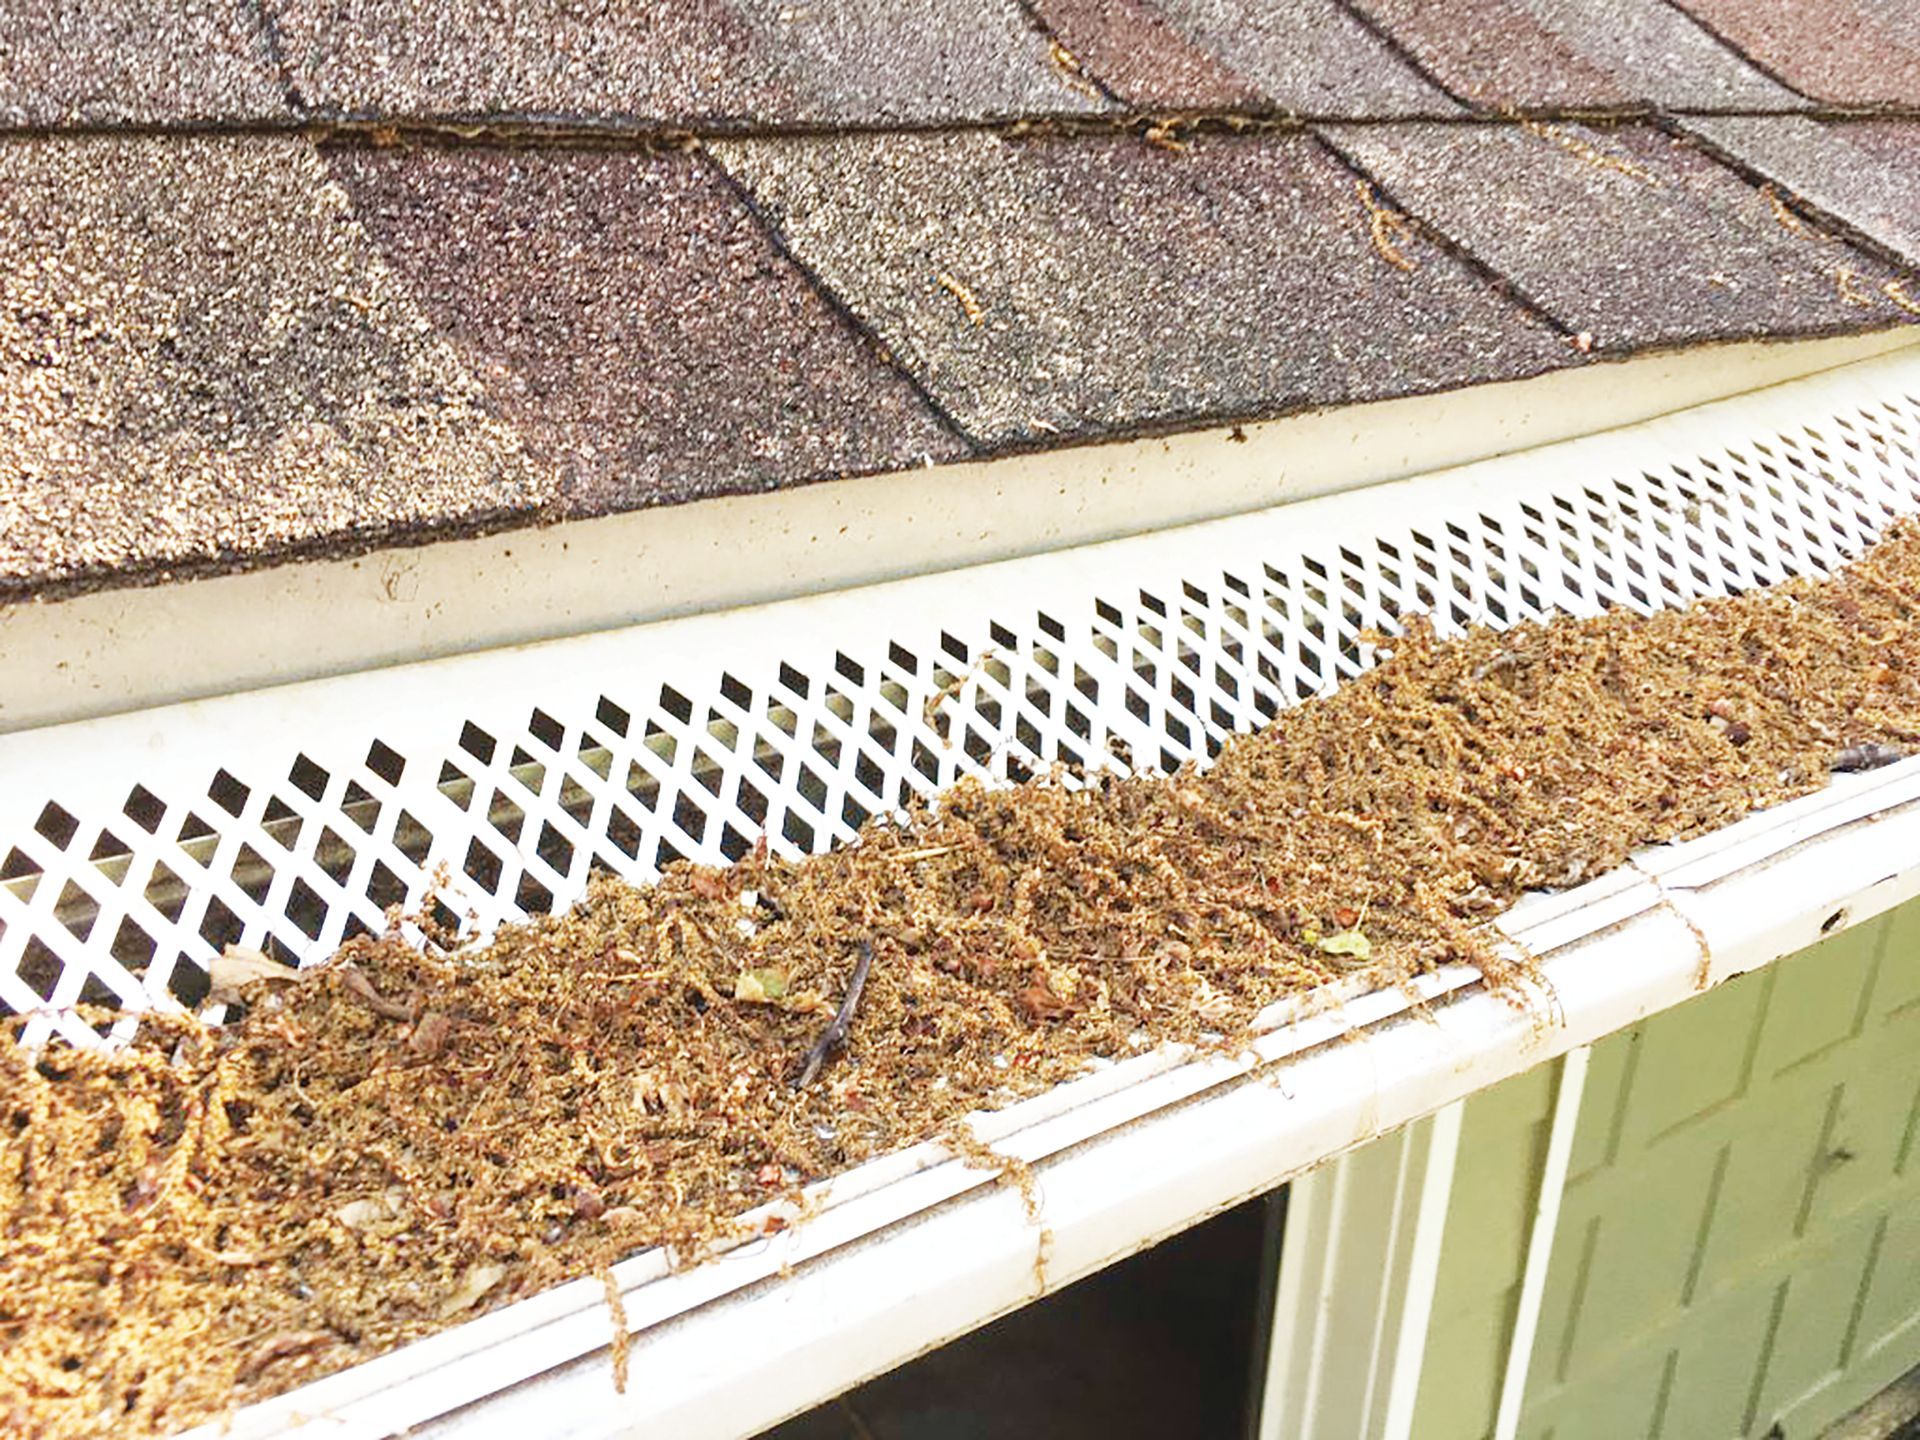 The old method of using gutter screens (pictured above) becomes ineffective as leaves and stems fall on the screens and get trapped, creating a mound of rotting debris on top of your gutters.